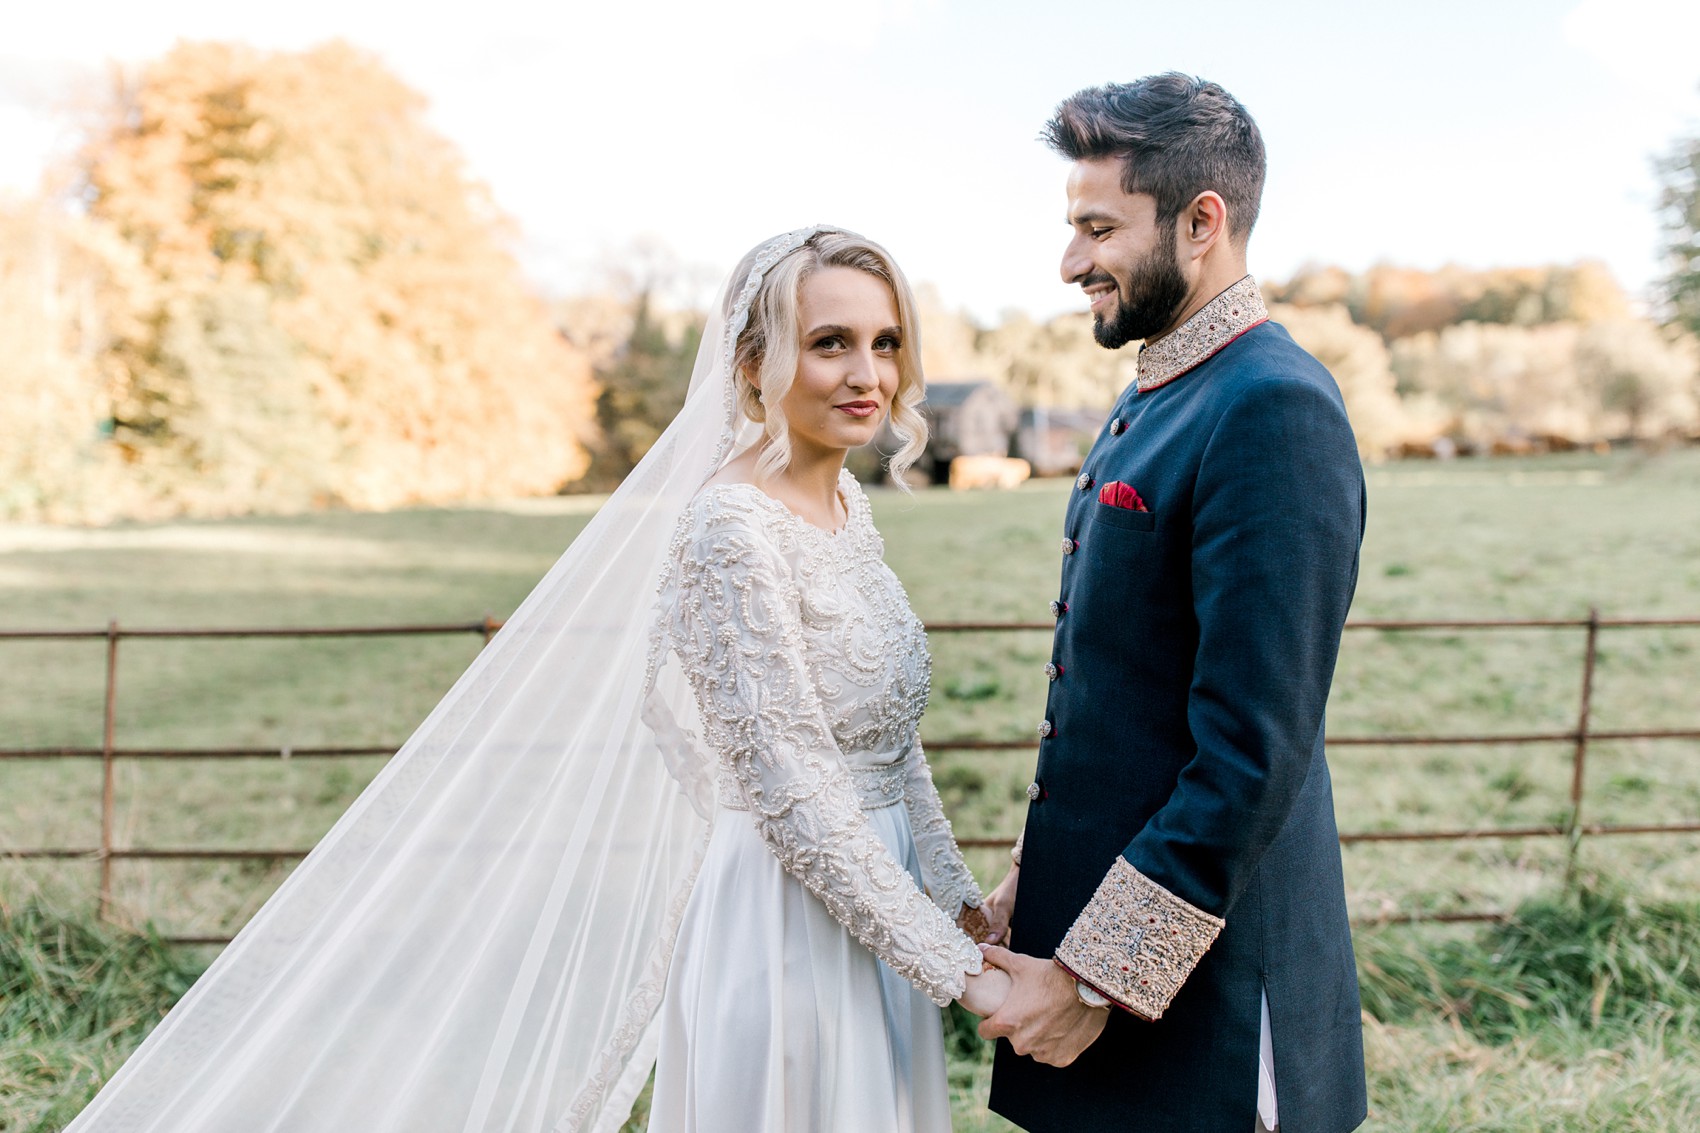 An Elegant and Multicultural Pakistani, Kashmiri and Scottish Fusion Wedding  at Pollok Country House in the Autumn - Love My Dress® UK Wedding Blog &  Wedding Directory